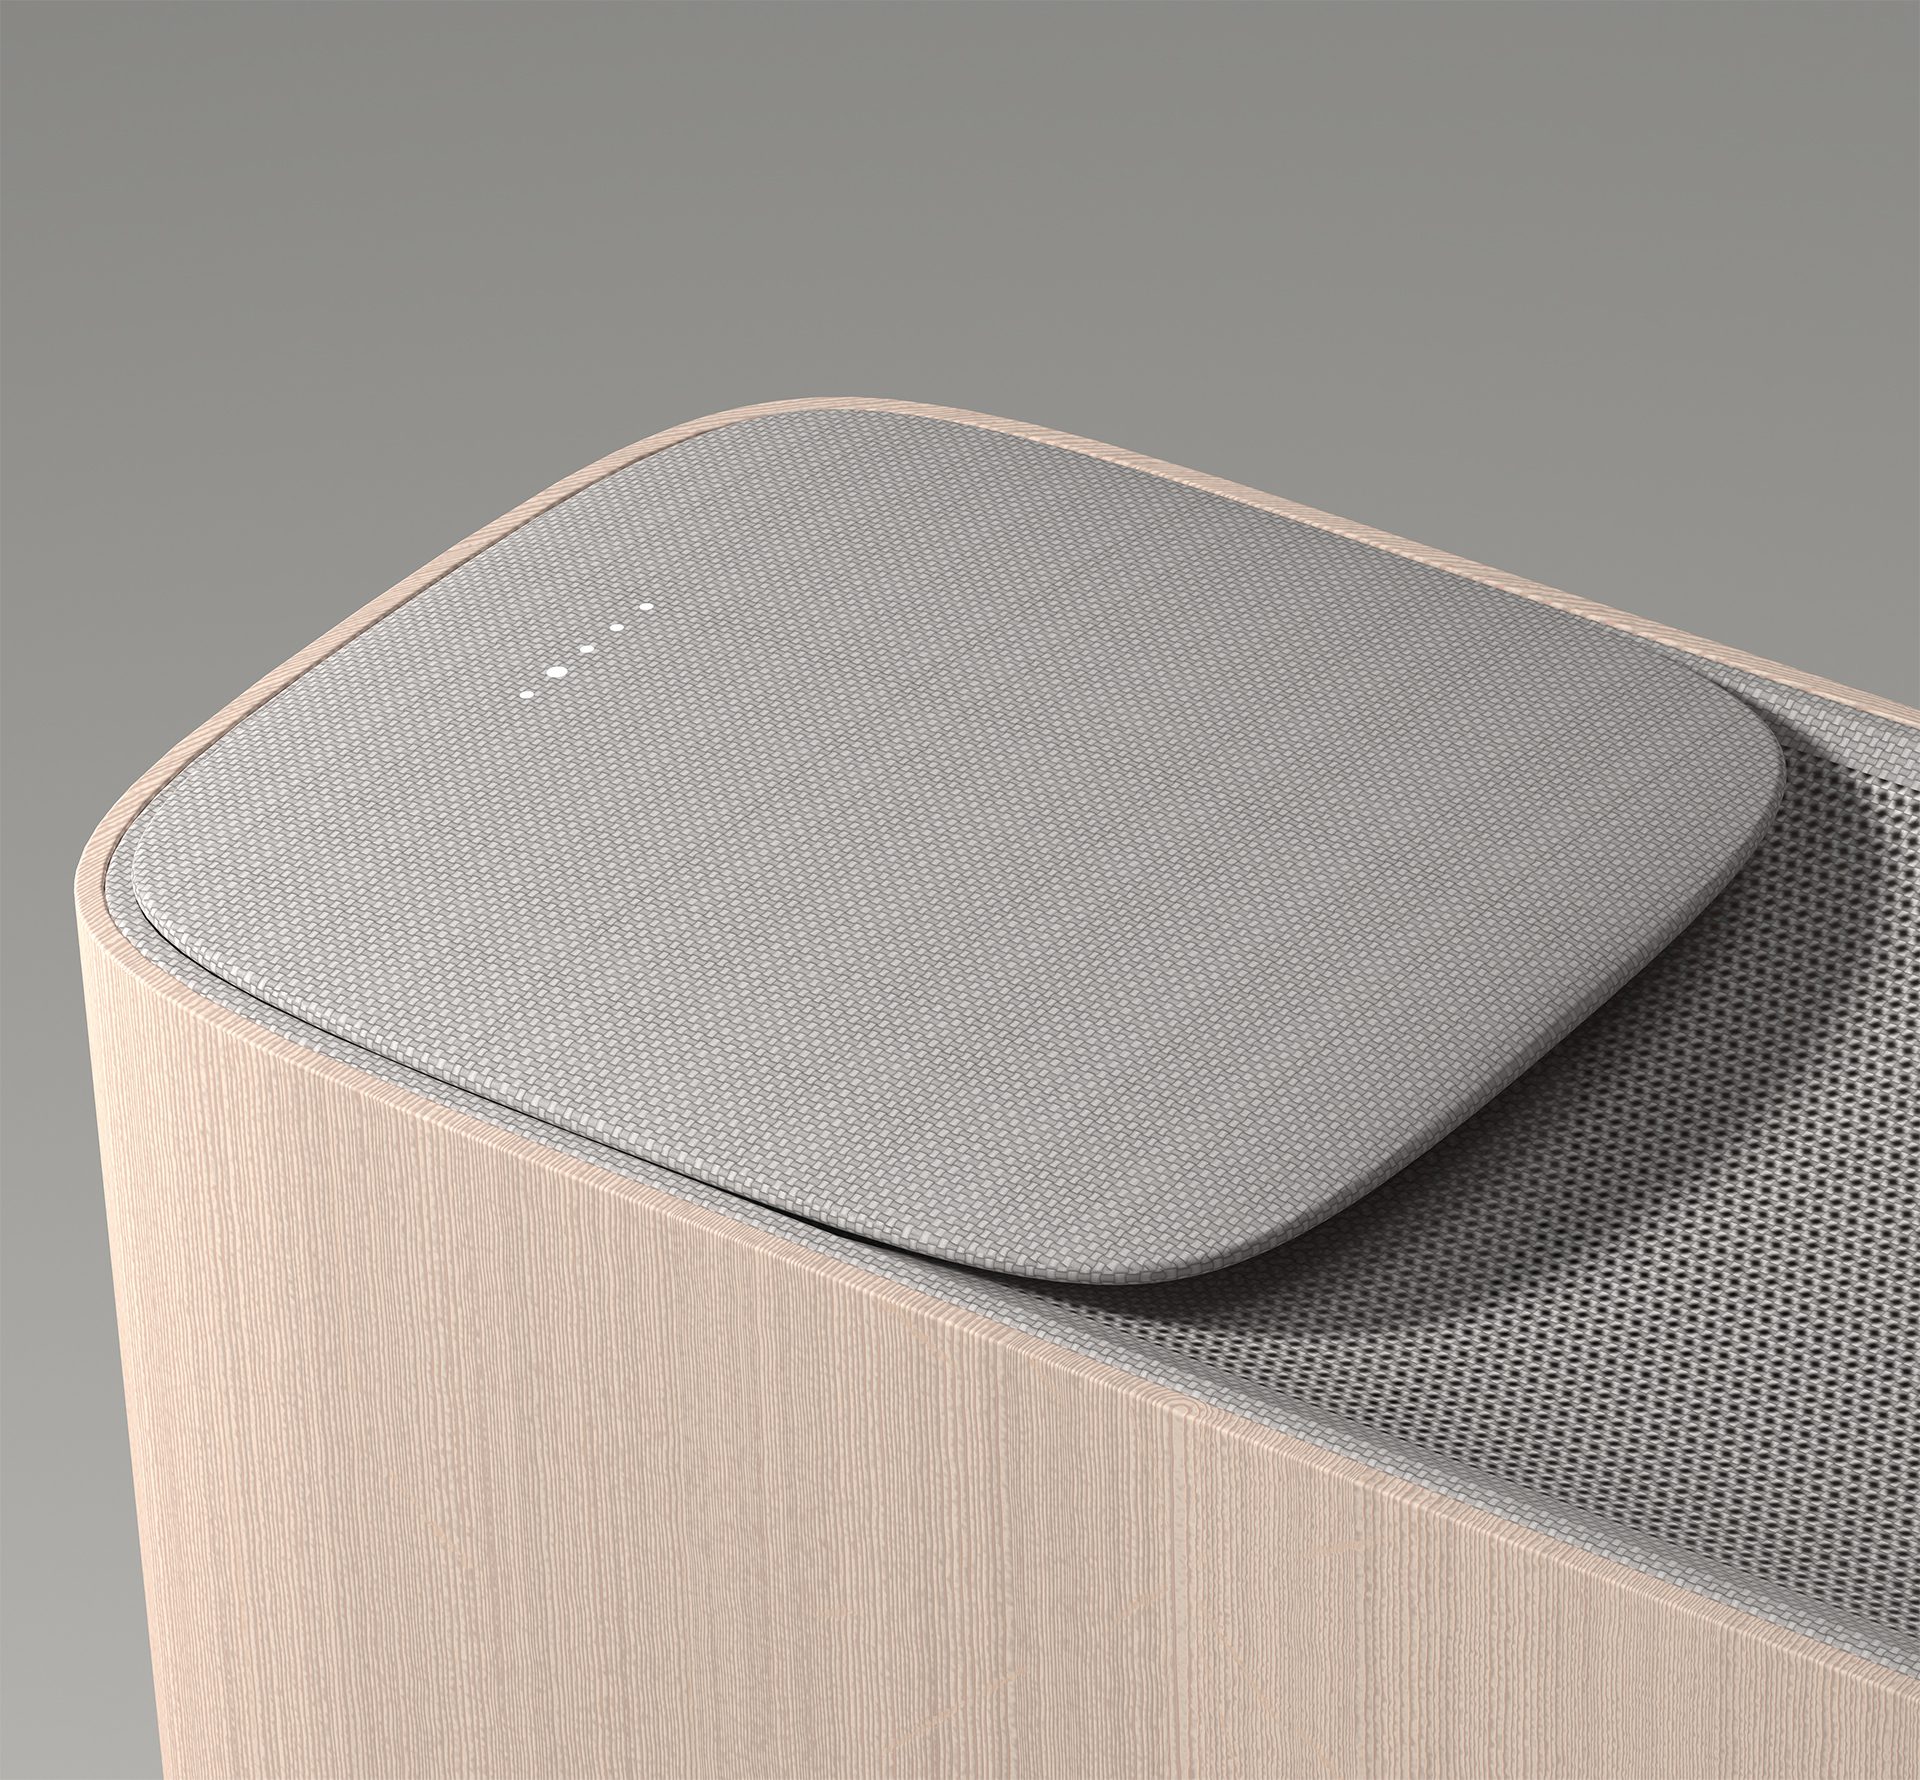 Aalto air purifier control panel detail render. UI panel is shown in its closed position. The UI panel is wrapped in a grey textile and shows white status lights.